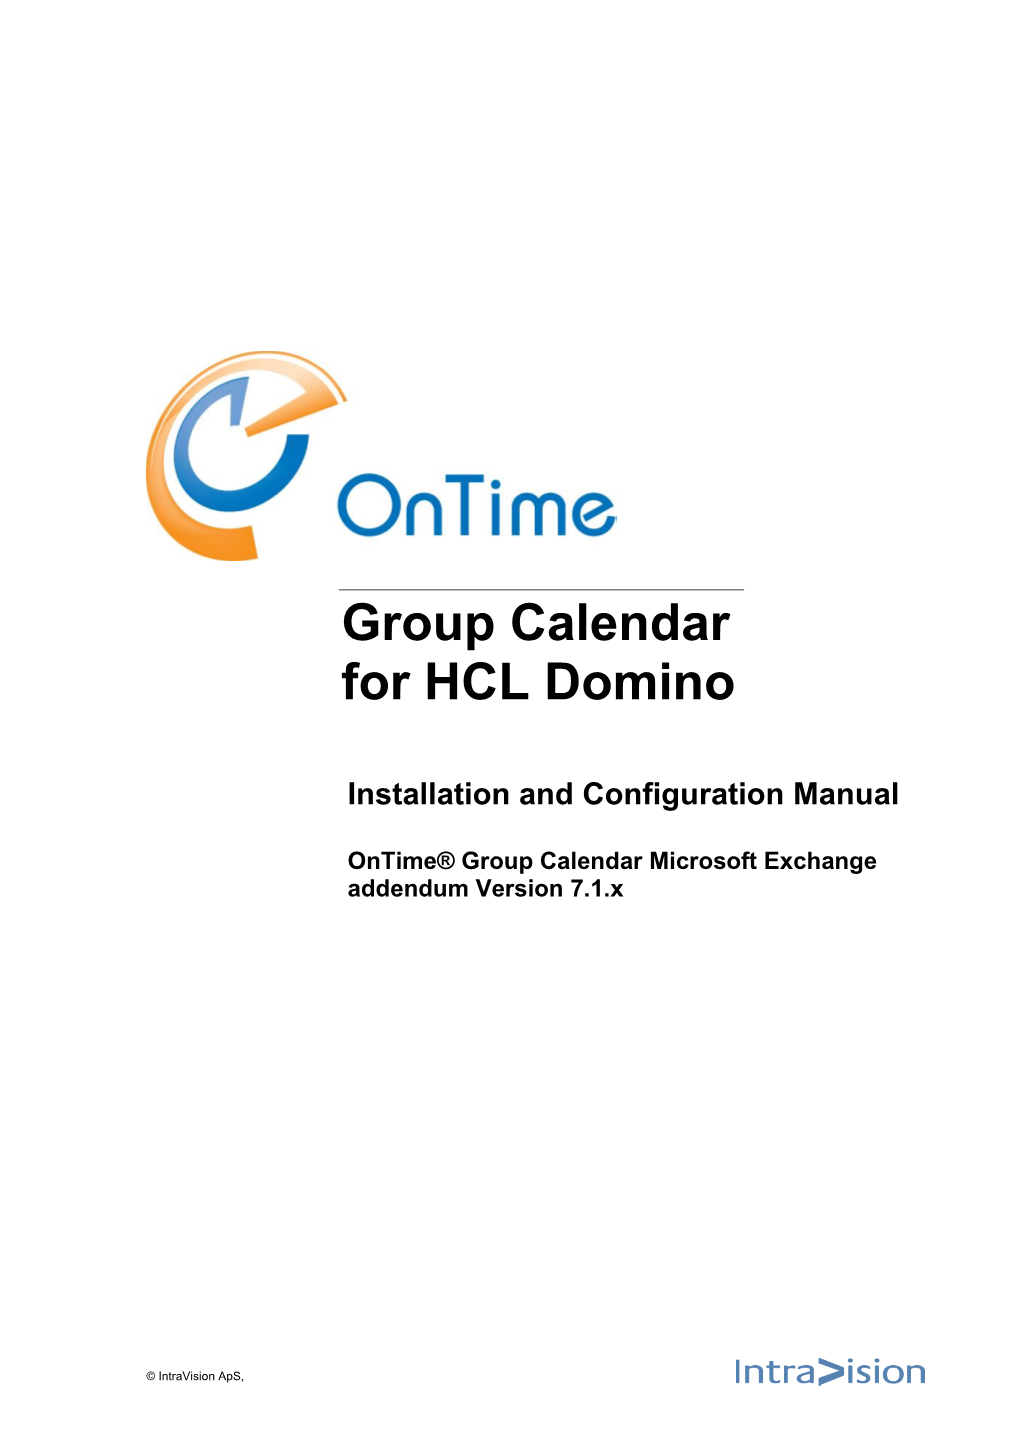 Group Calendar for HCL Domino